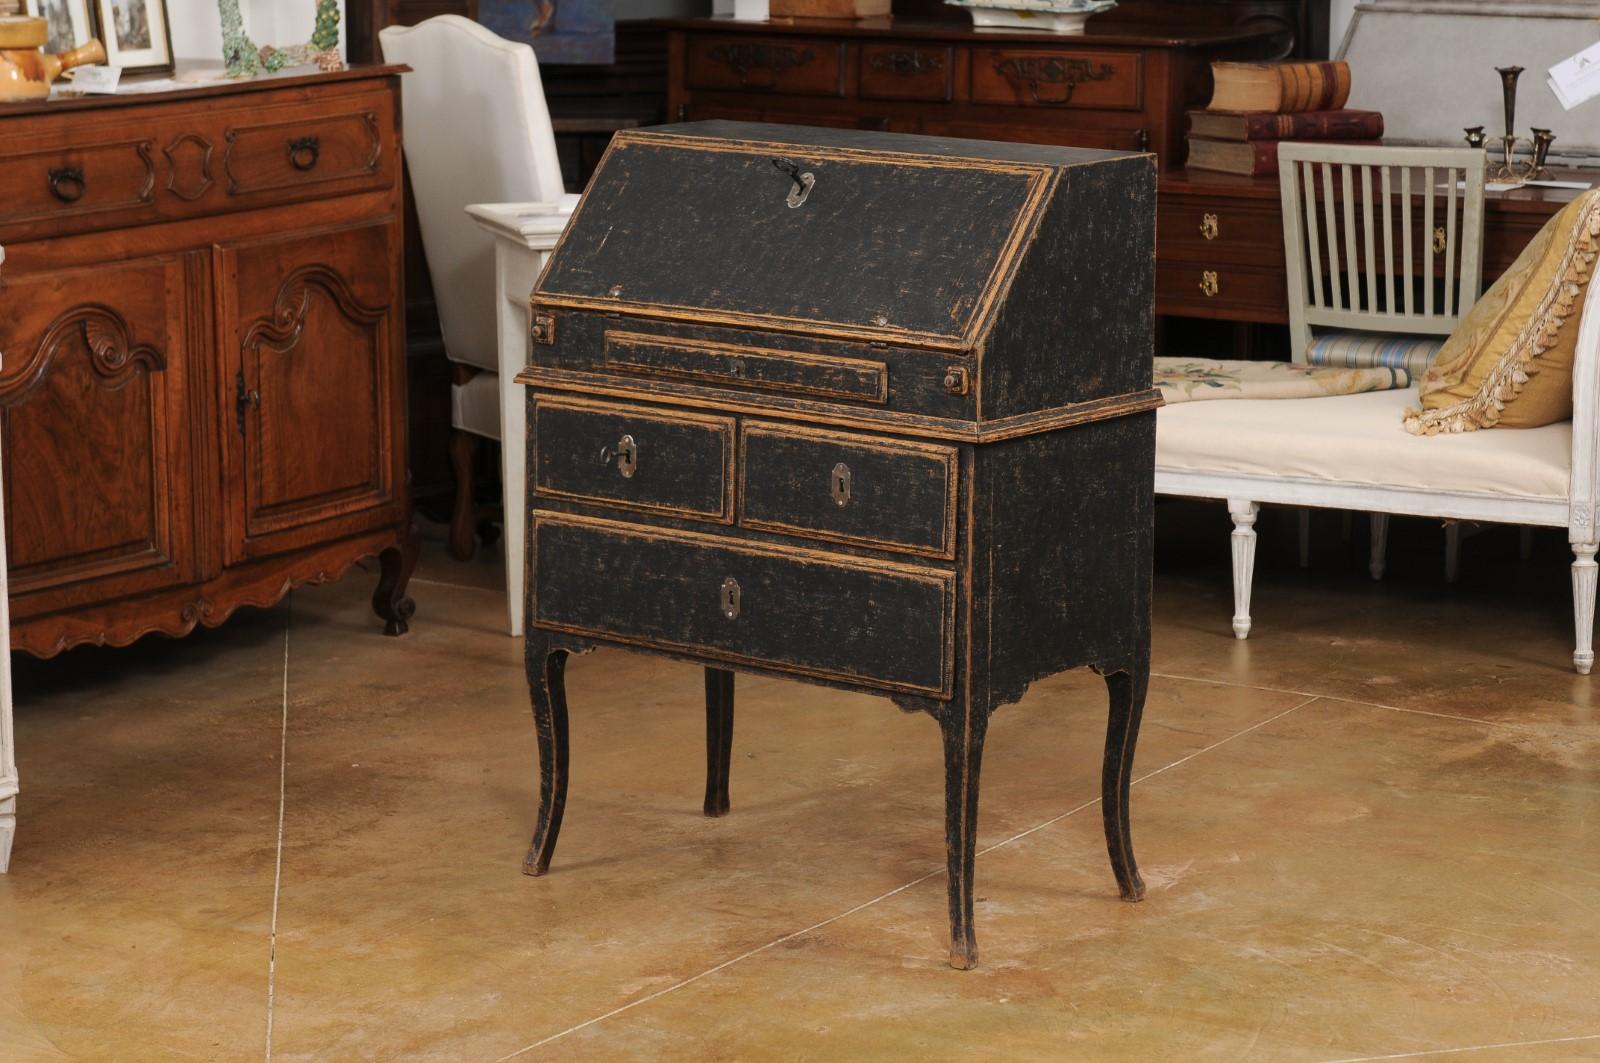 Swedish Rococo Period Slant Front Desk Painted in Black with Distressed Finish 5